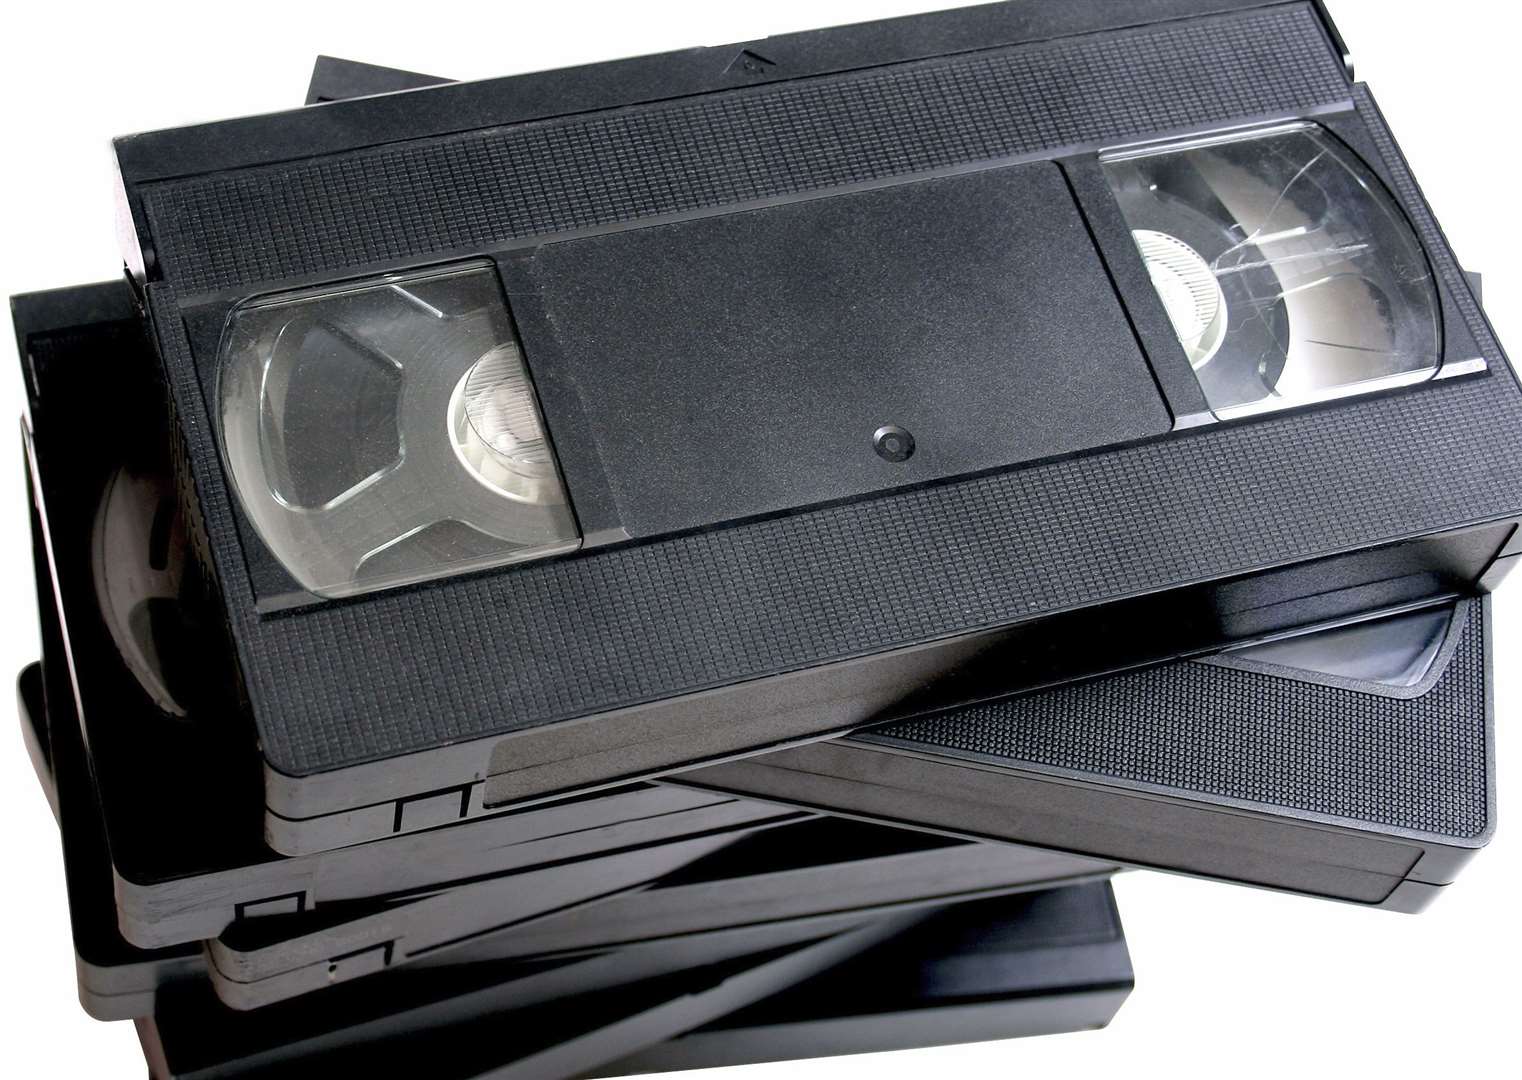 The VHS video tape - a distant relative of the Blu-ray